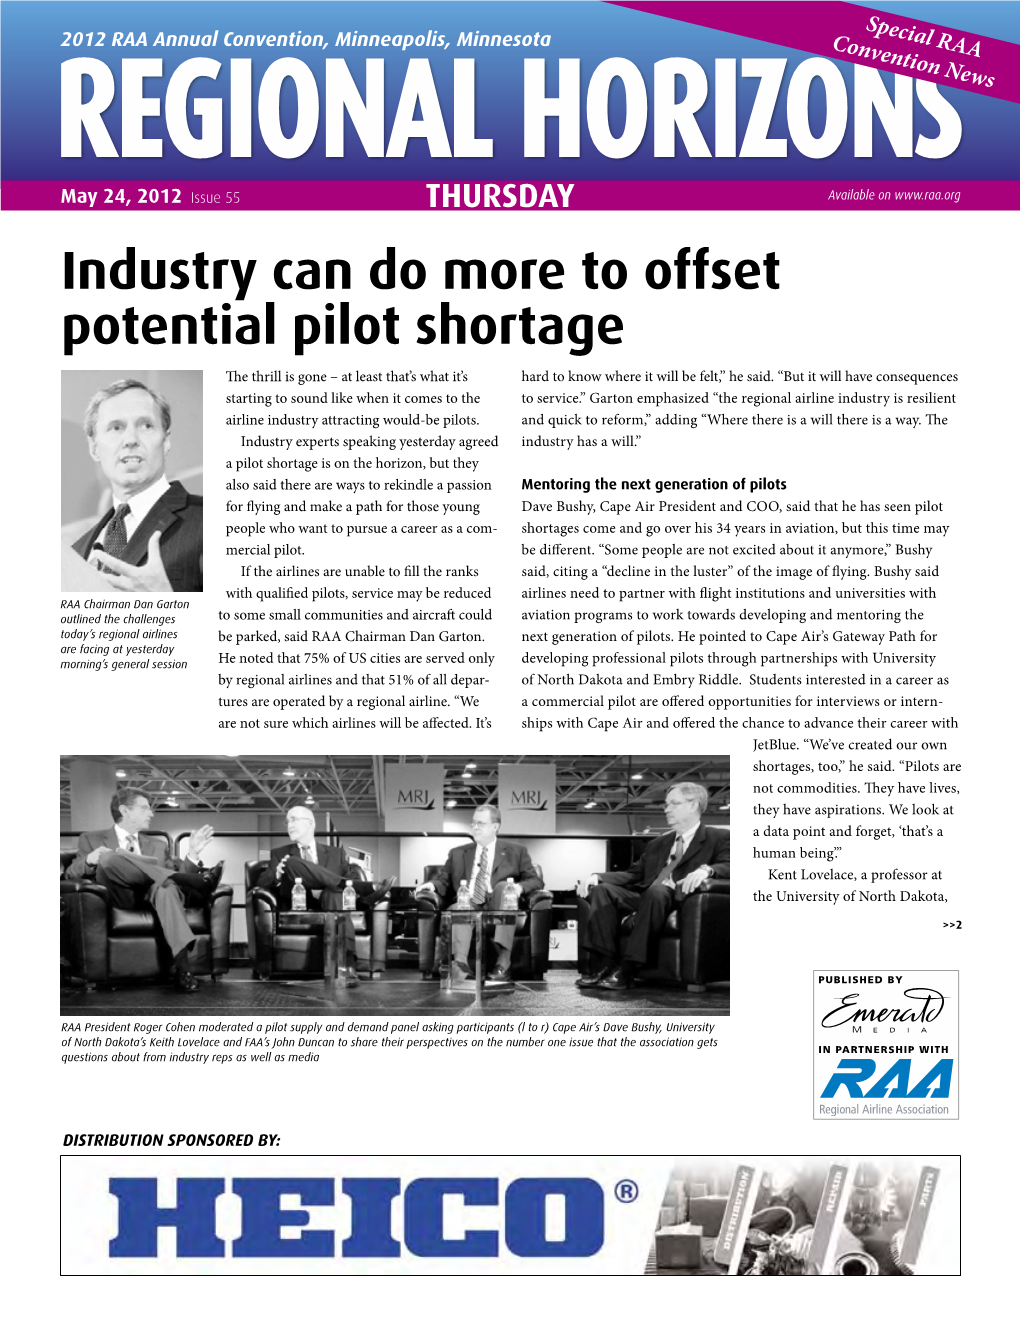 Industry Can Do More to Offset Potential Pilot Shortage